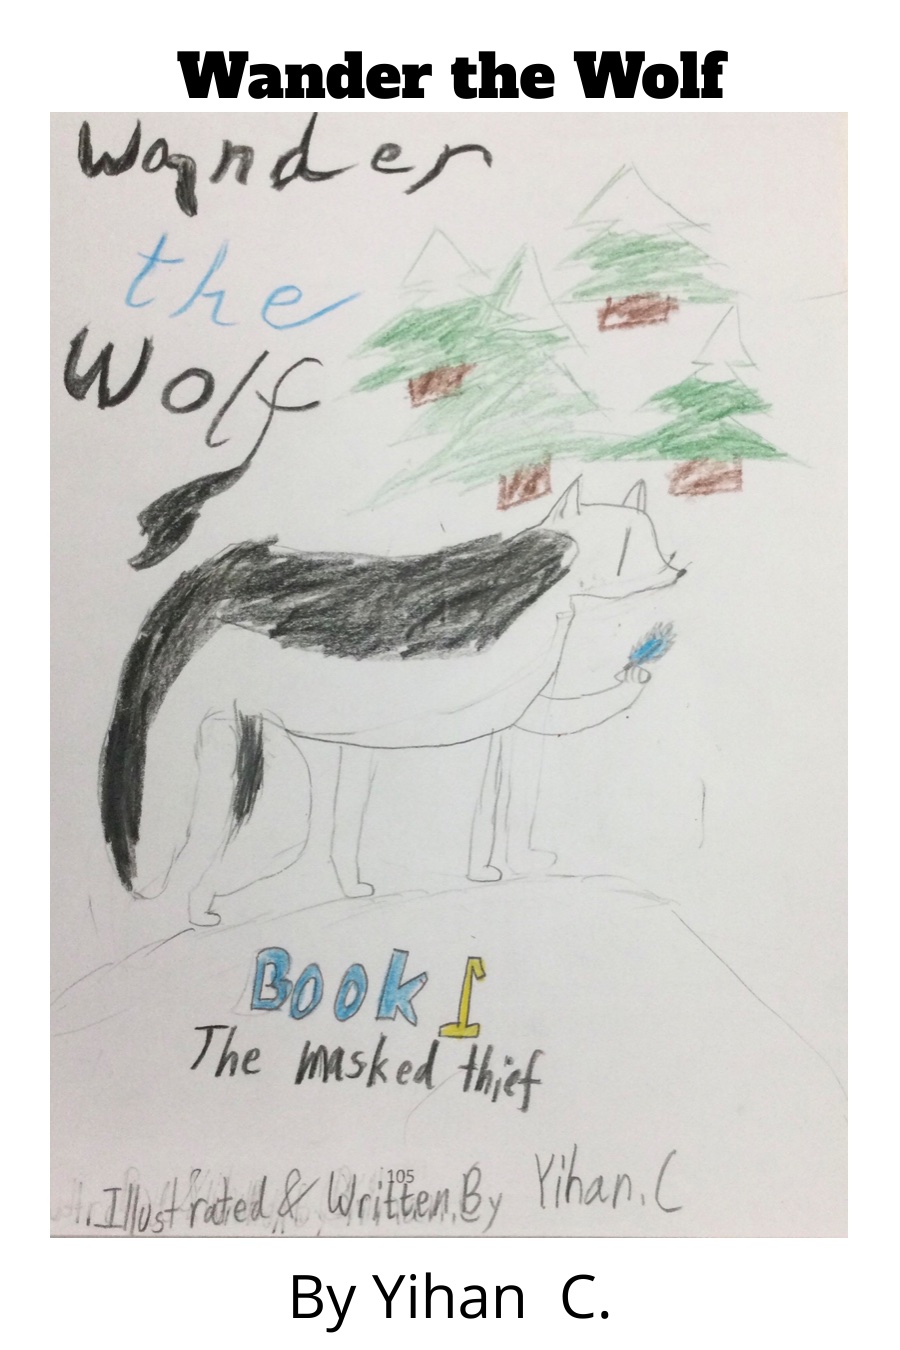 Wander the Wolf – Book 1 – The Masked Thief by Yihan C